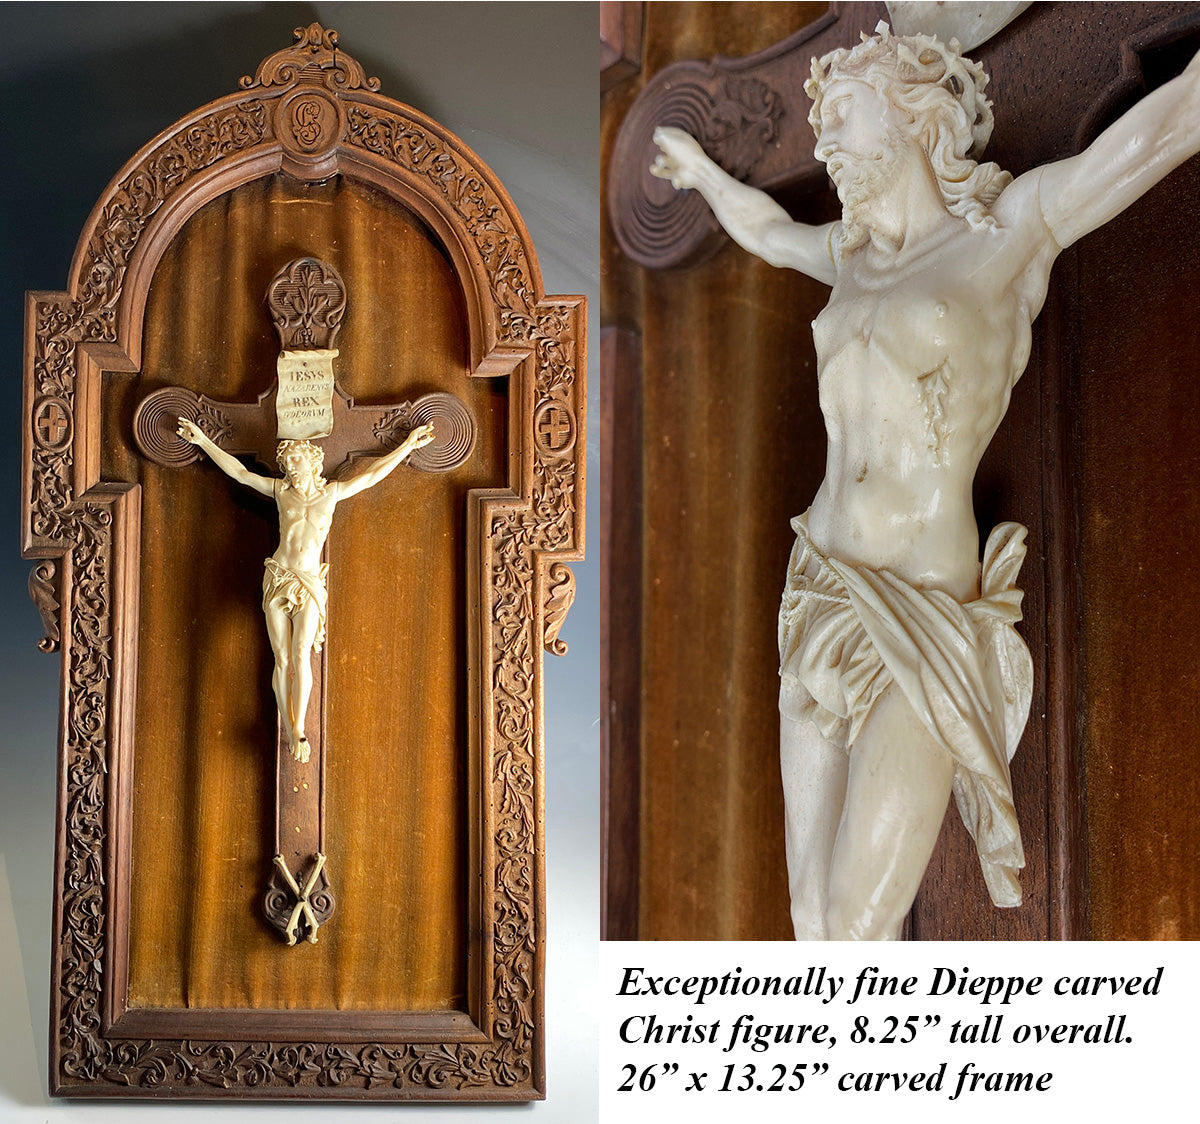 RARE c.1700s Dieppe H Carved Ivory Christ on Crucifix, Frame dates c.1855